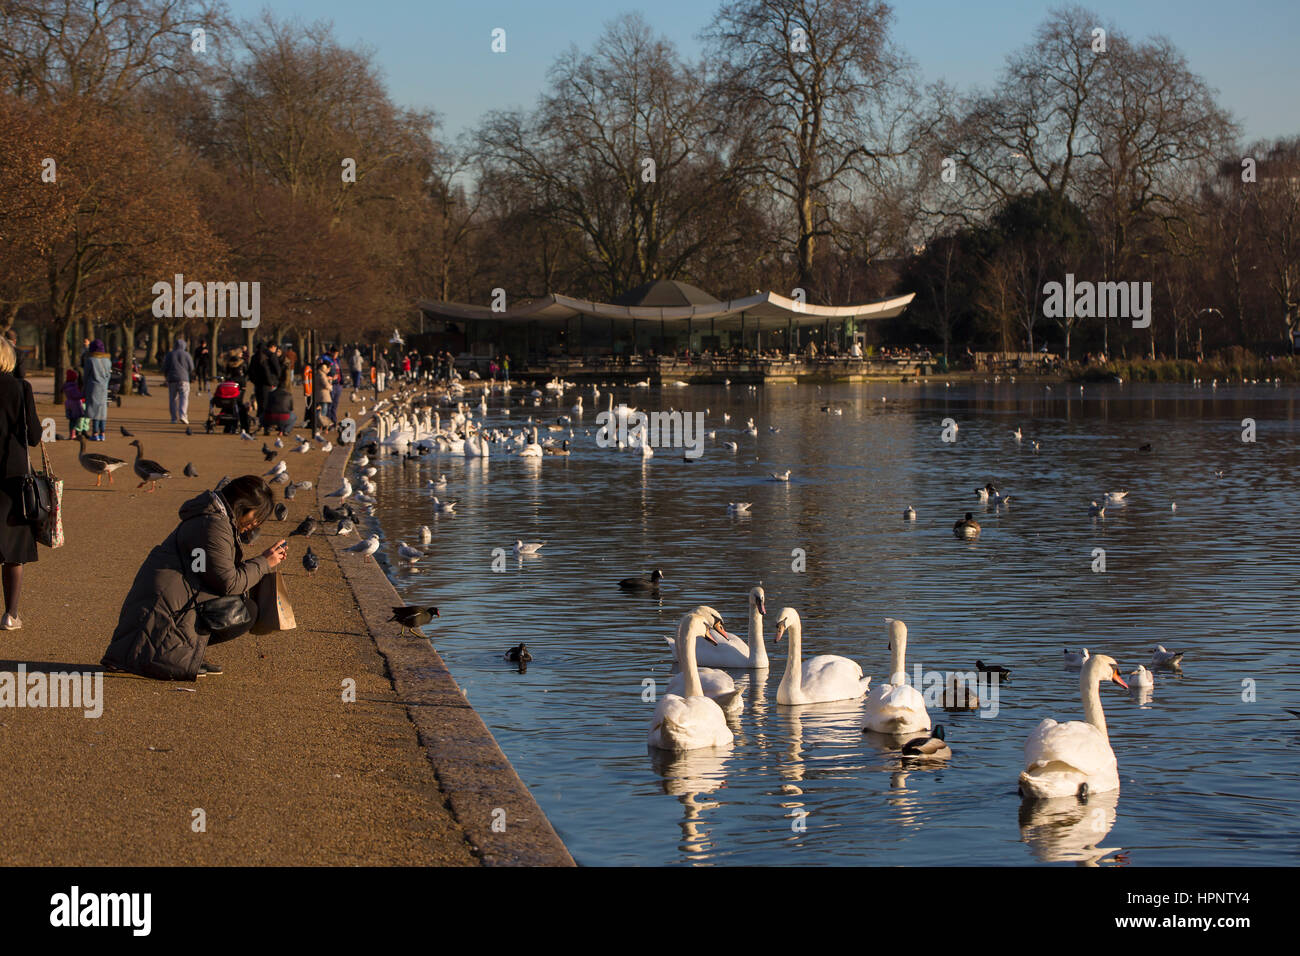 Park in London. A cafe in a park in London is a place where the wild birds gather looking to be feed by the passers by. The barren trees talk of winte Stock Photo